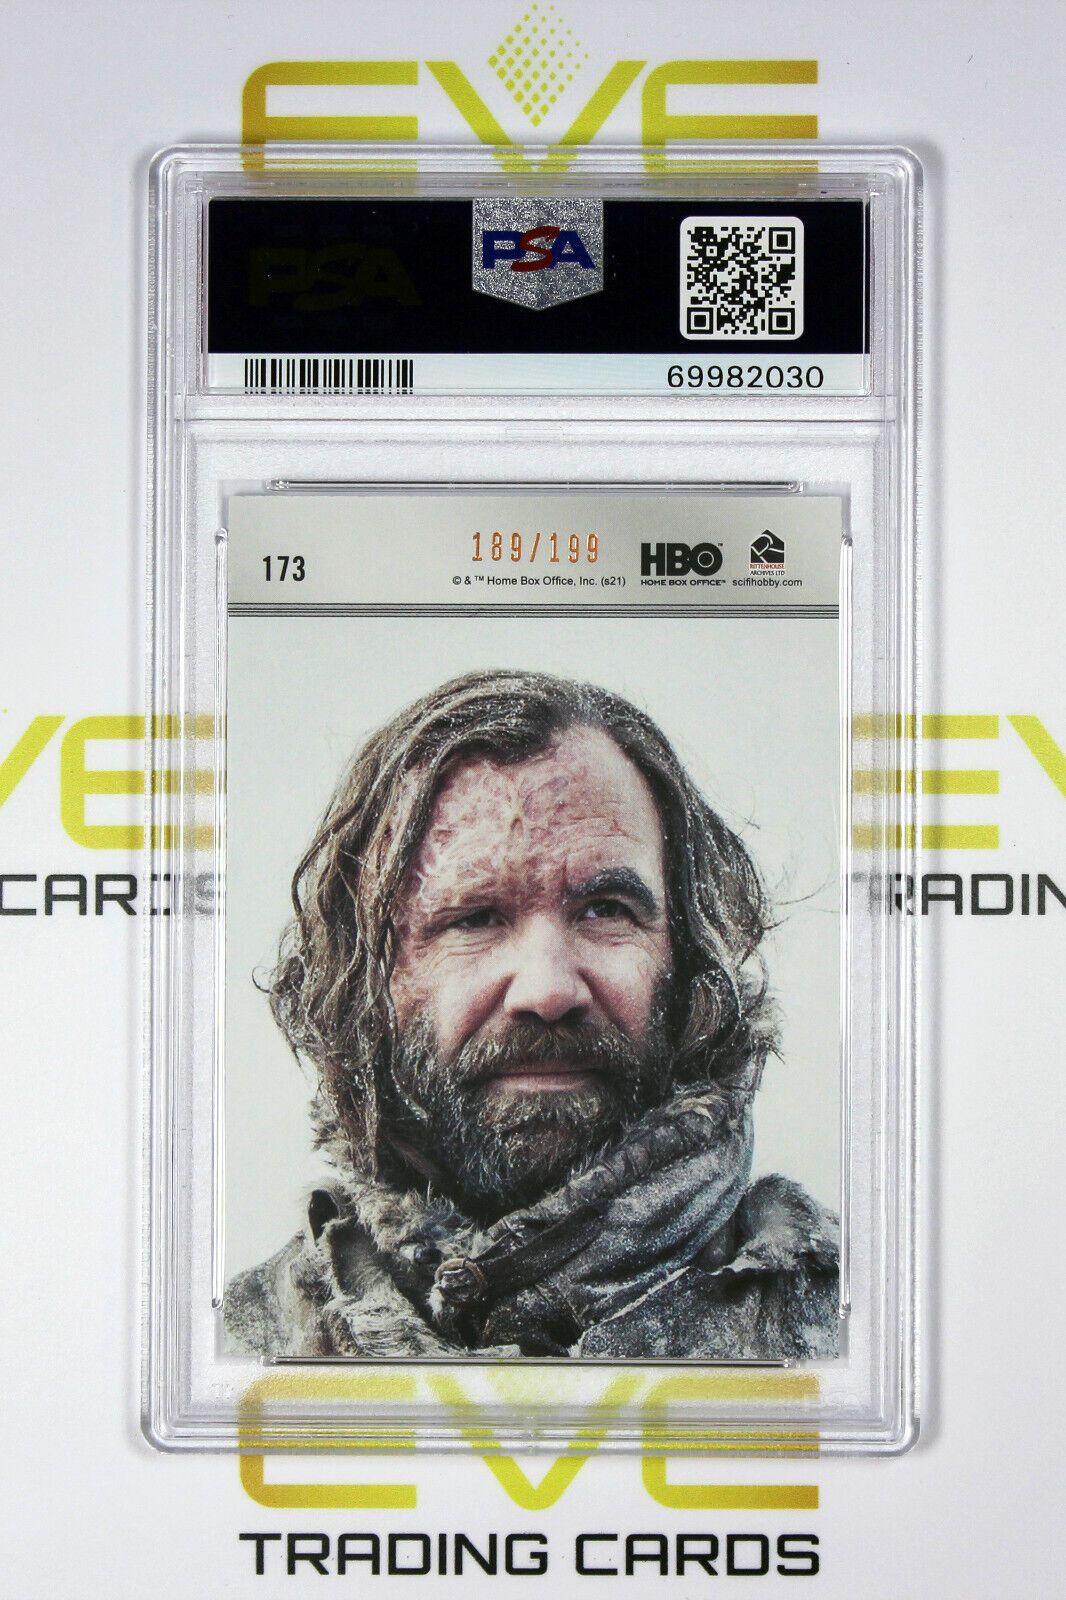 Graded Game of Thrones Card - #173 2021 The Hound - Copper /199 - PSA 9